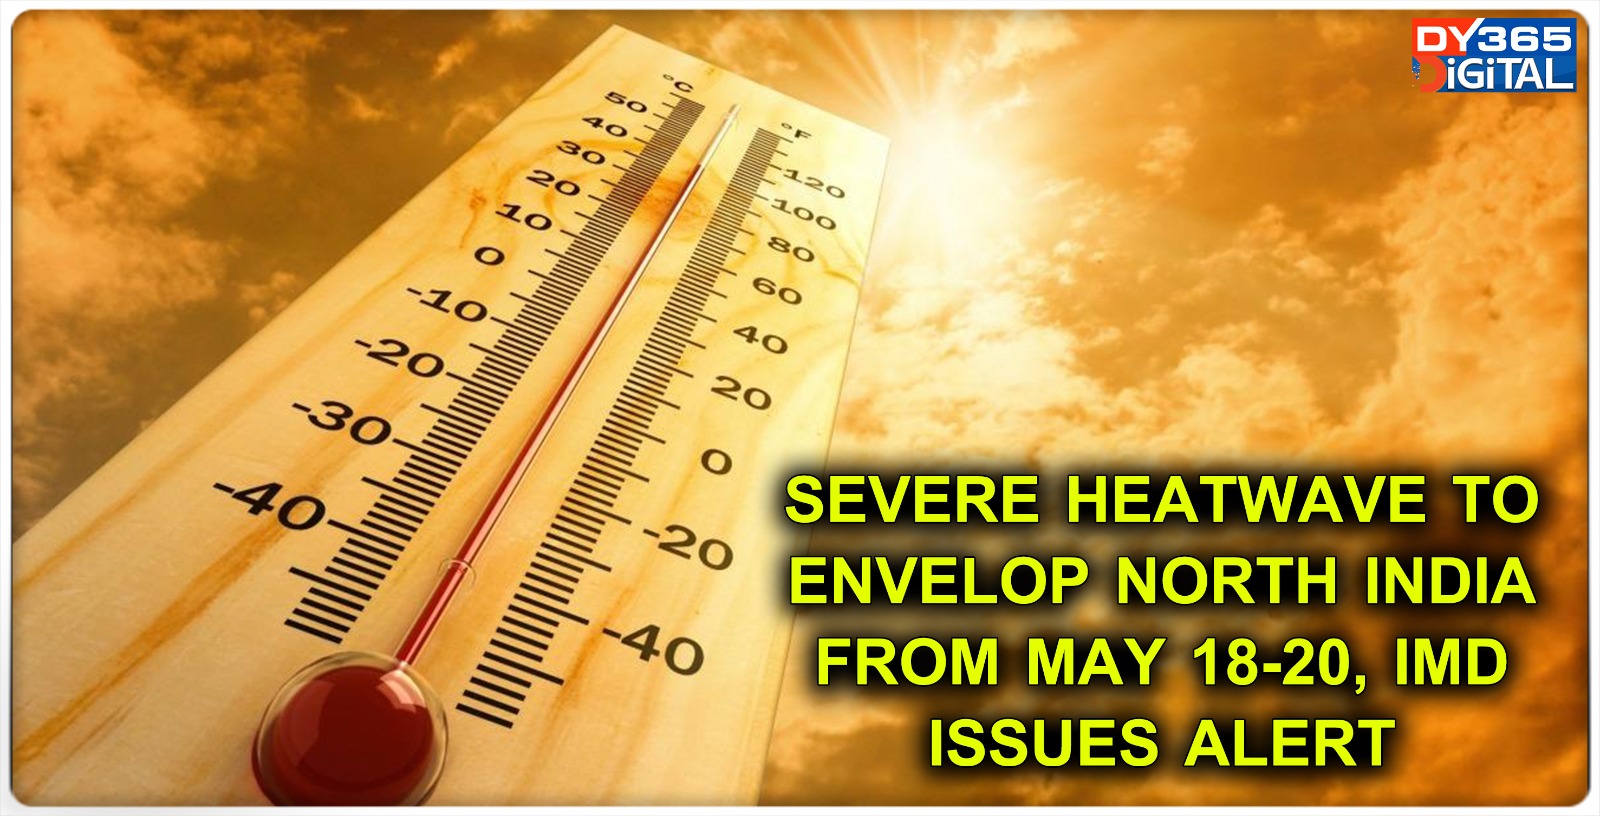 Severe Heatwave to envelop North India from May 18-20, IMD issues alert 